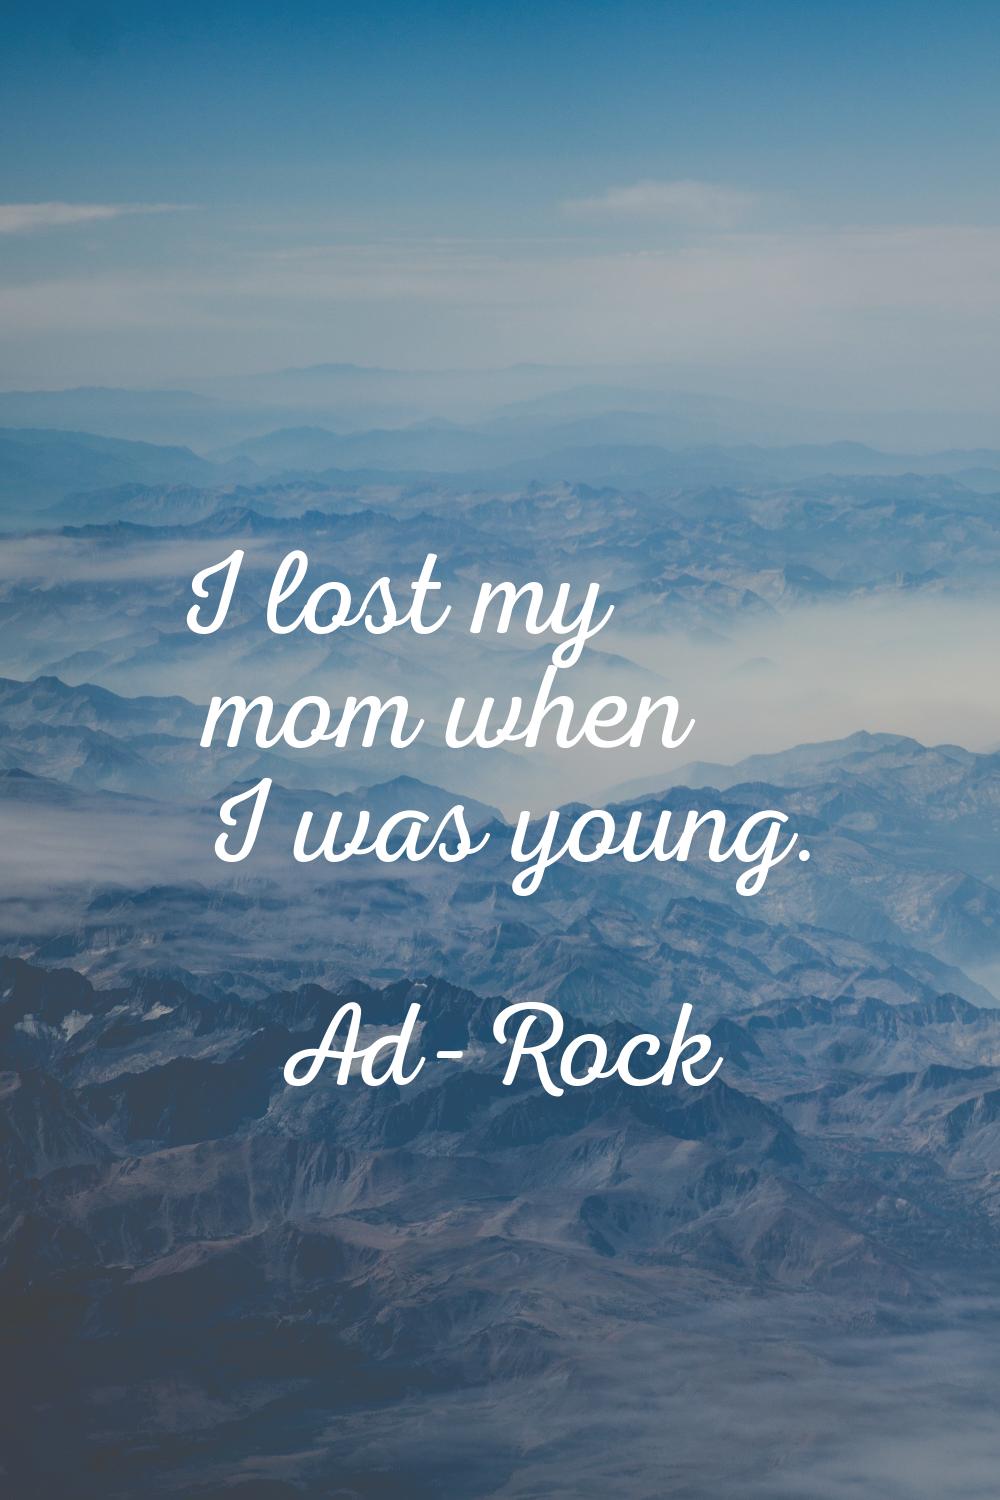 I lost my mom when I was young.